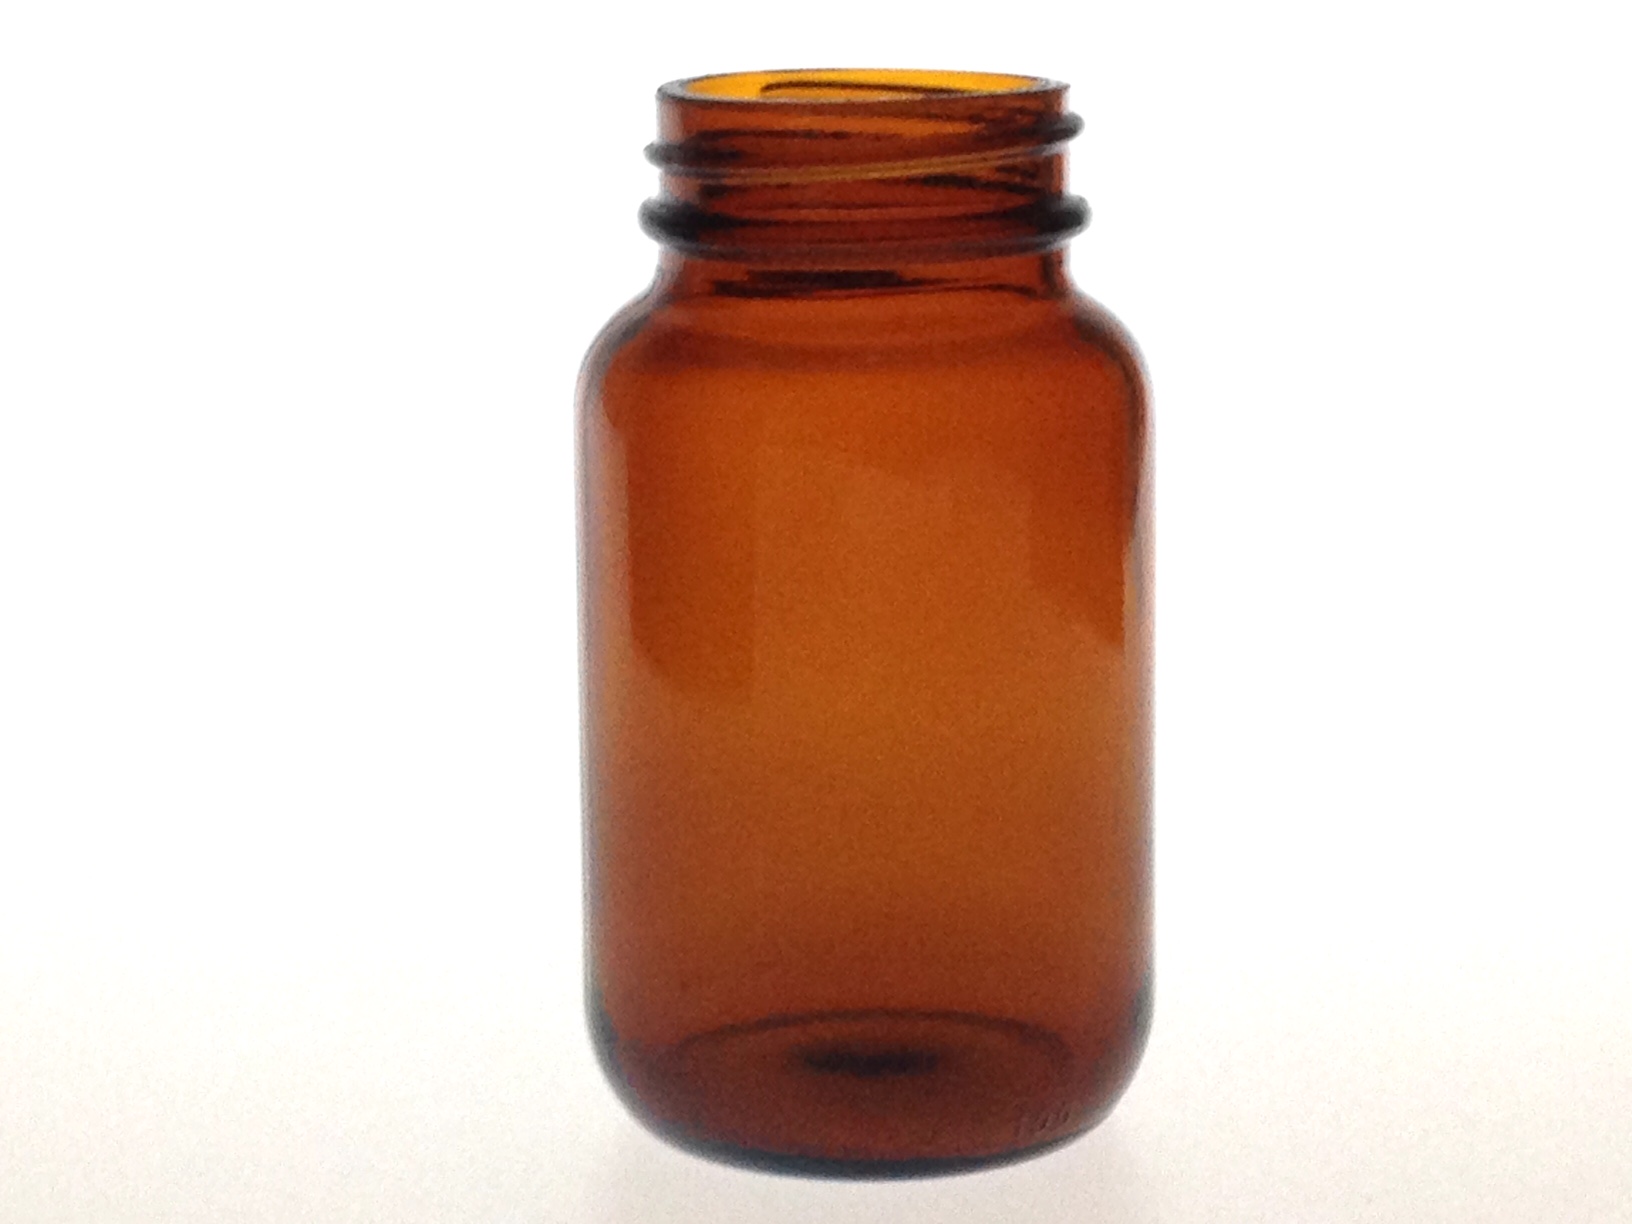 WIDE MOUTH AMBER GLASS 125 ML R3/38 BOTTLE 